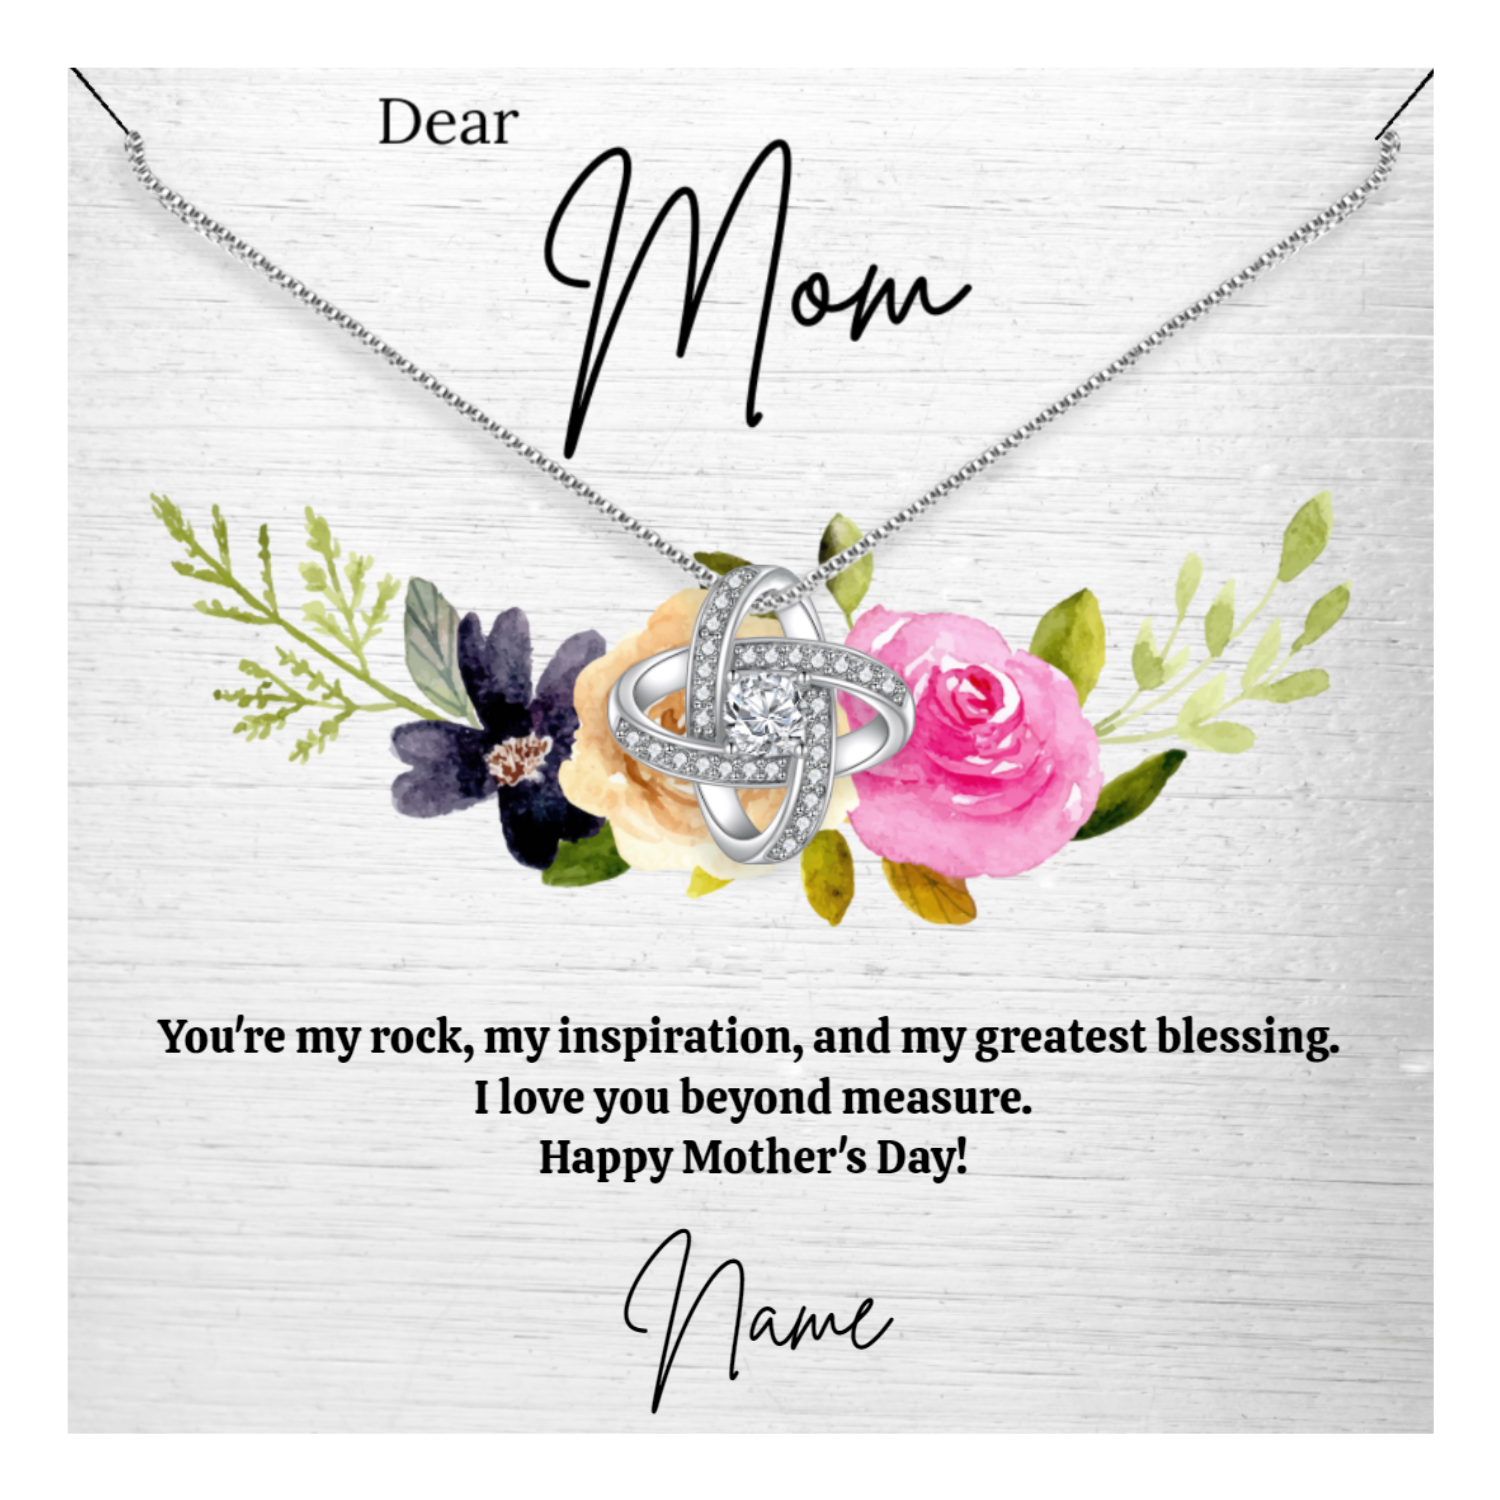 Personalized Necklaces + Message Cards - Love Knot Necklace + Personalized Mom Card 